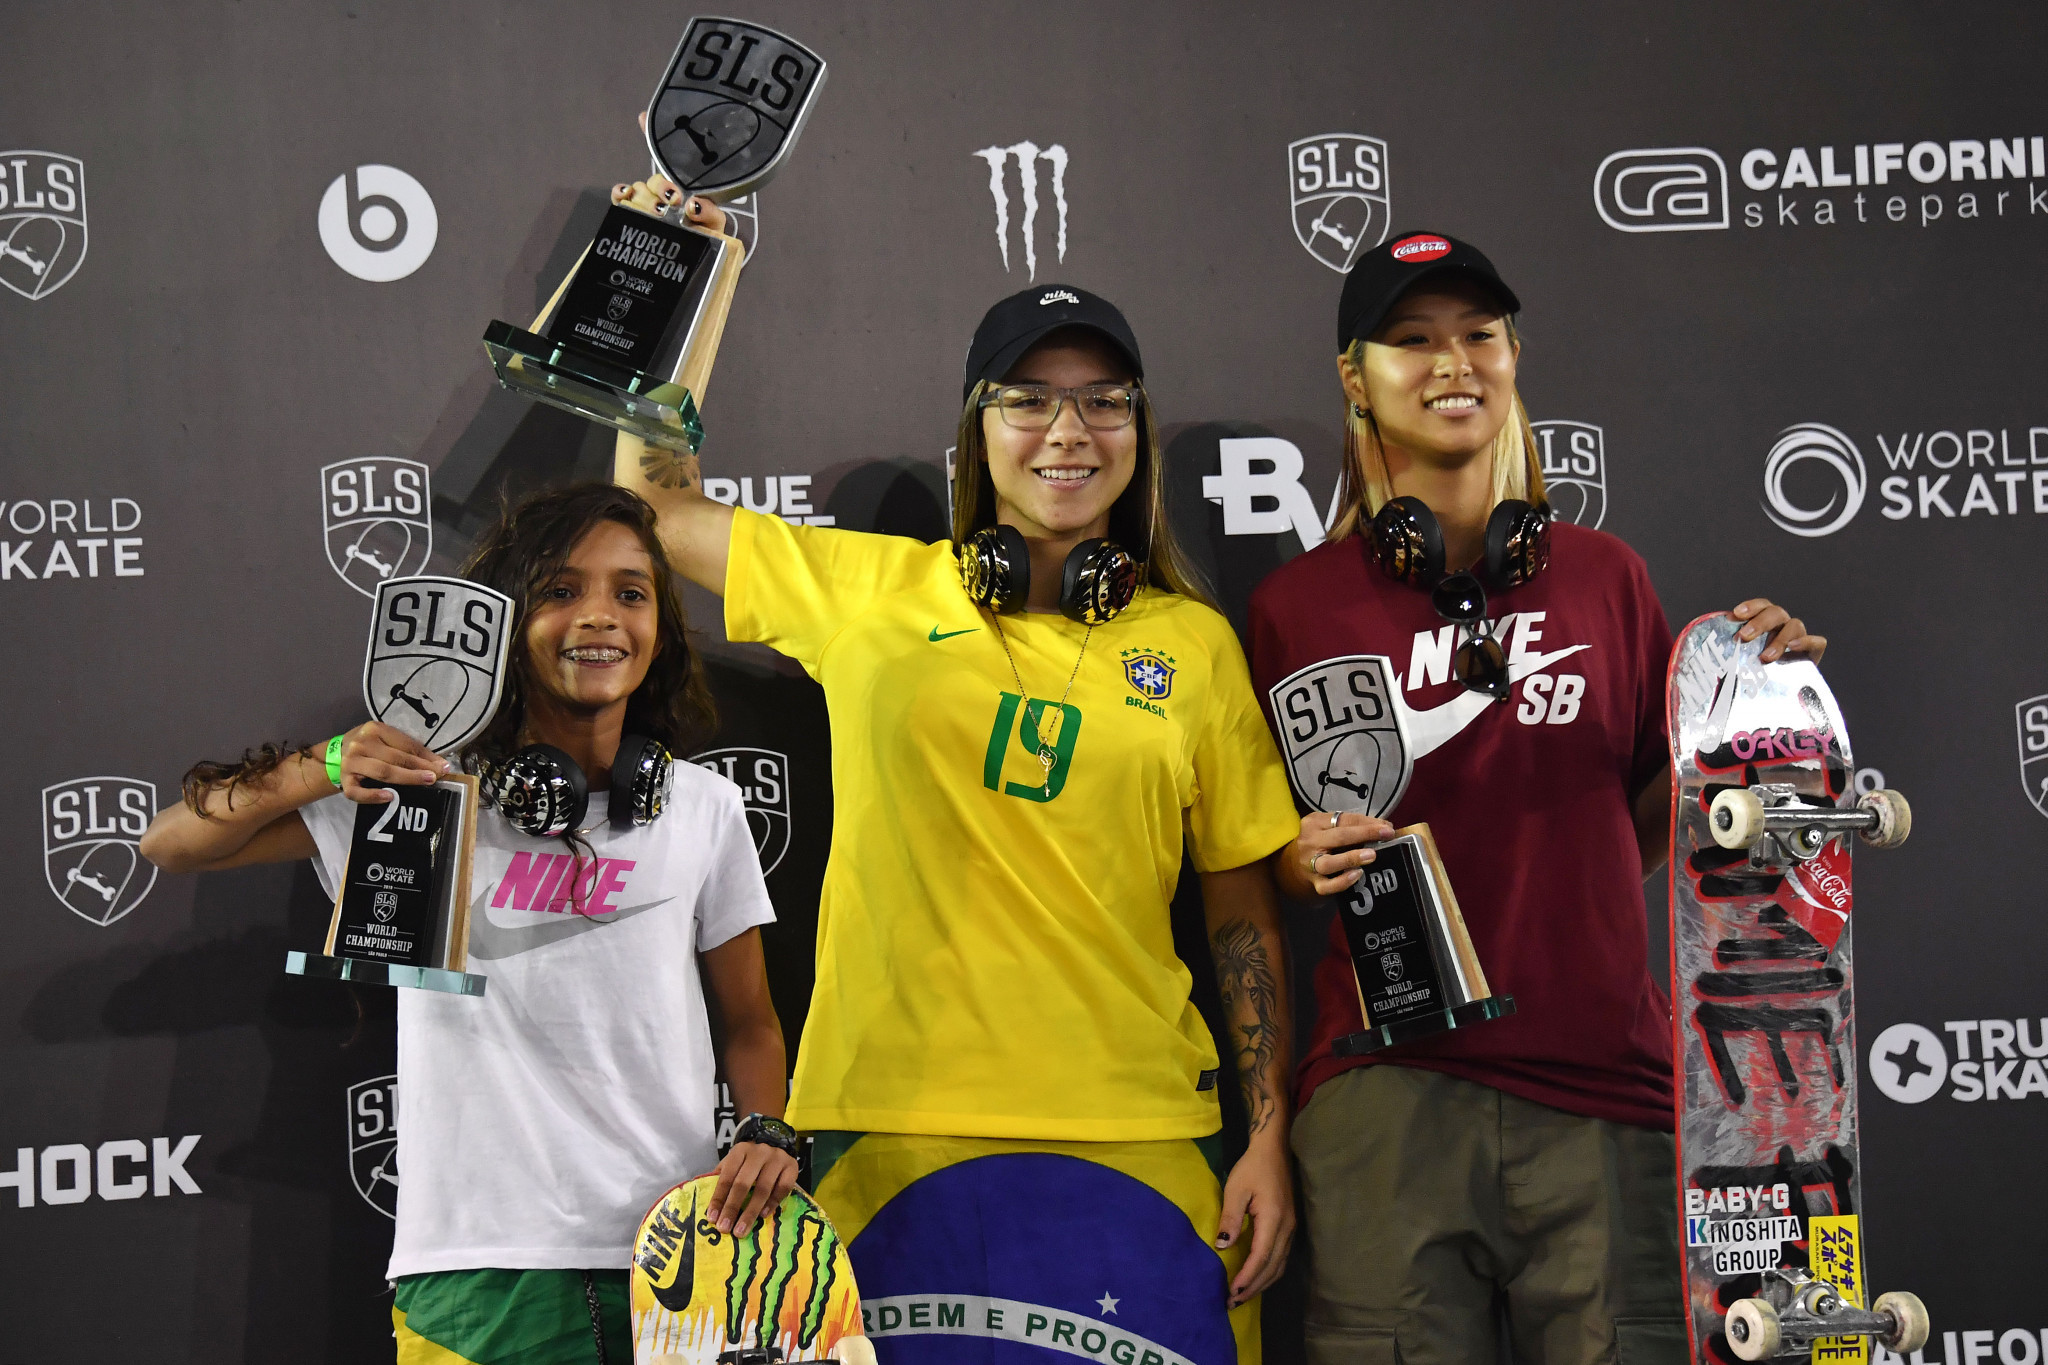 The women's podium from the 2019 World Championship in São Paulo was headed by Brazil's Pamela Rosa, centre, who is set to compete on the WS WLS World Pro Tour ©Getty Images